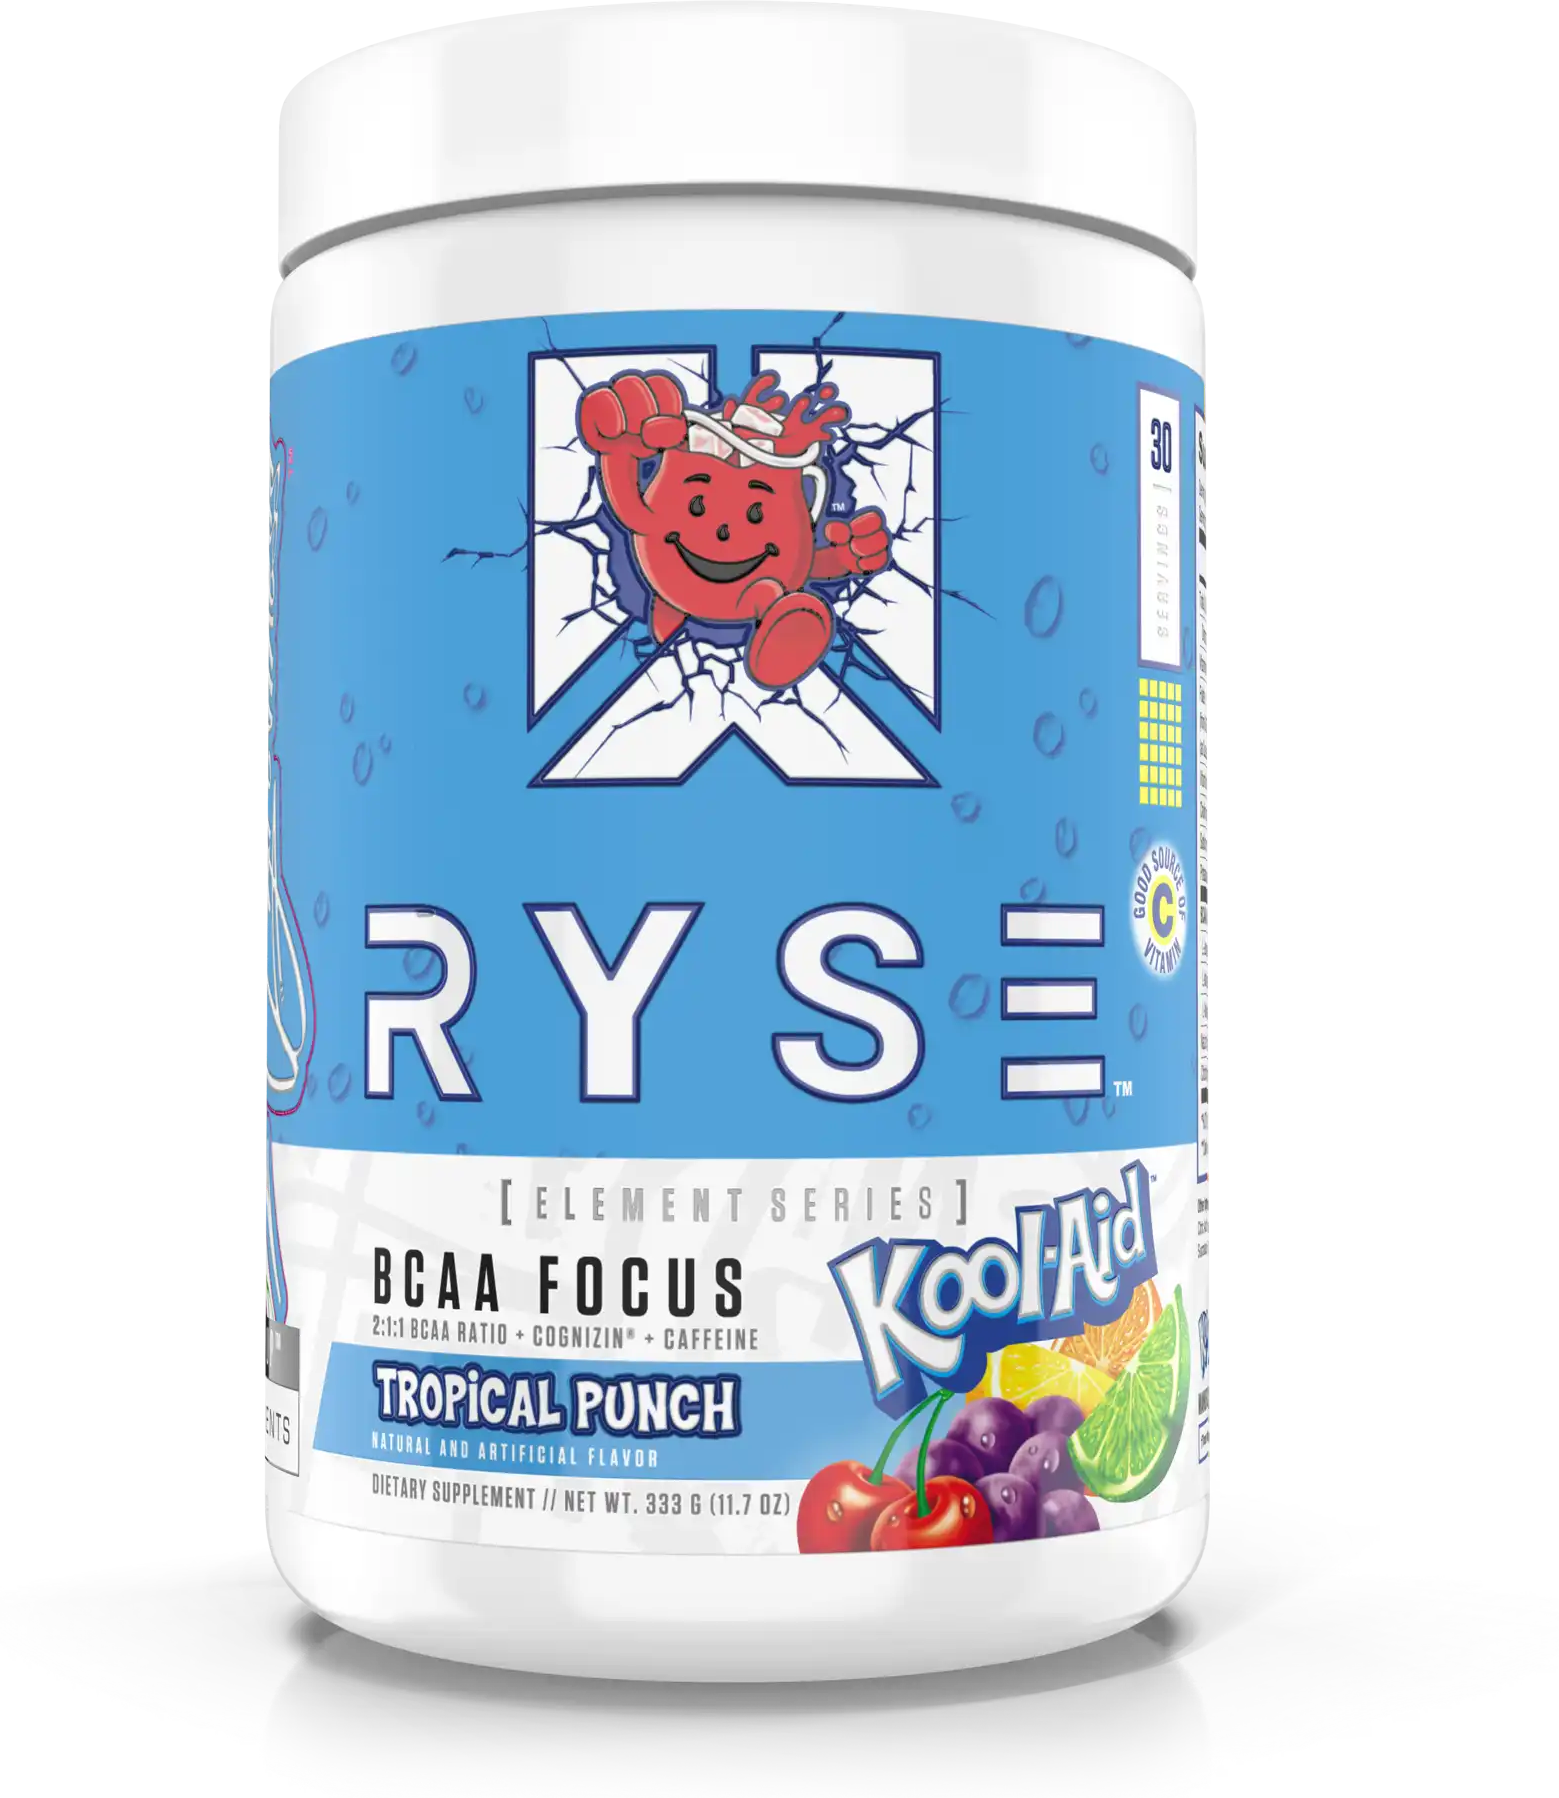 Loaded Premium Whey Protein with MCTs - Cinnamon Toast (2 Lbs. / 27  Servings) by Ryse at the Vitamin Shoppe